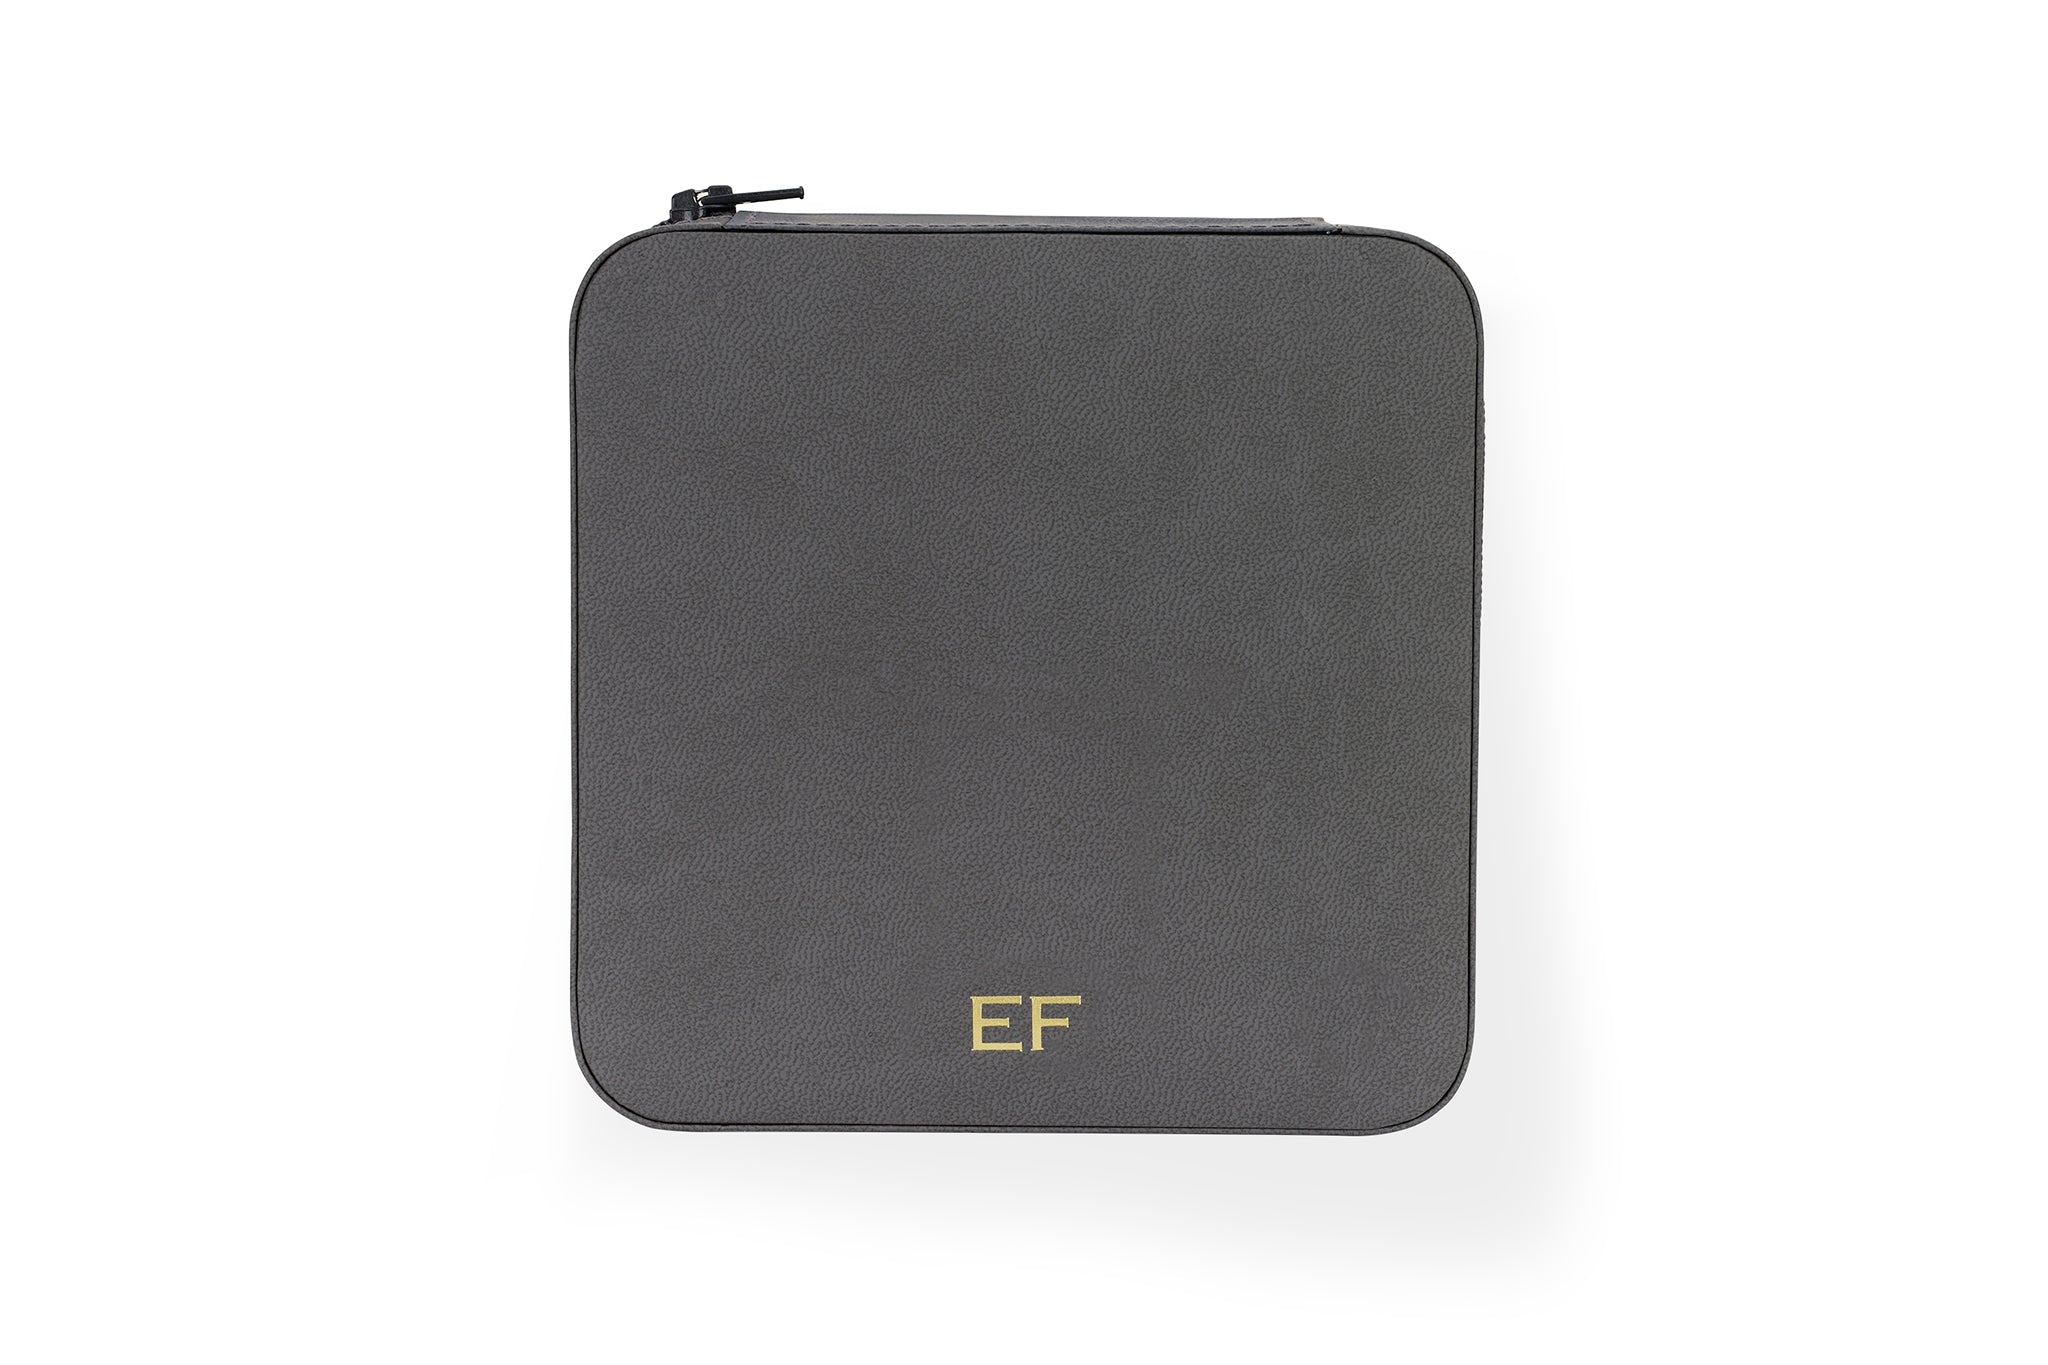 Grey Jewelry Travel Pouch with zipper enclosure and E and F gold initials monogram